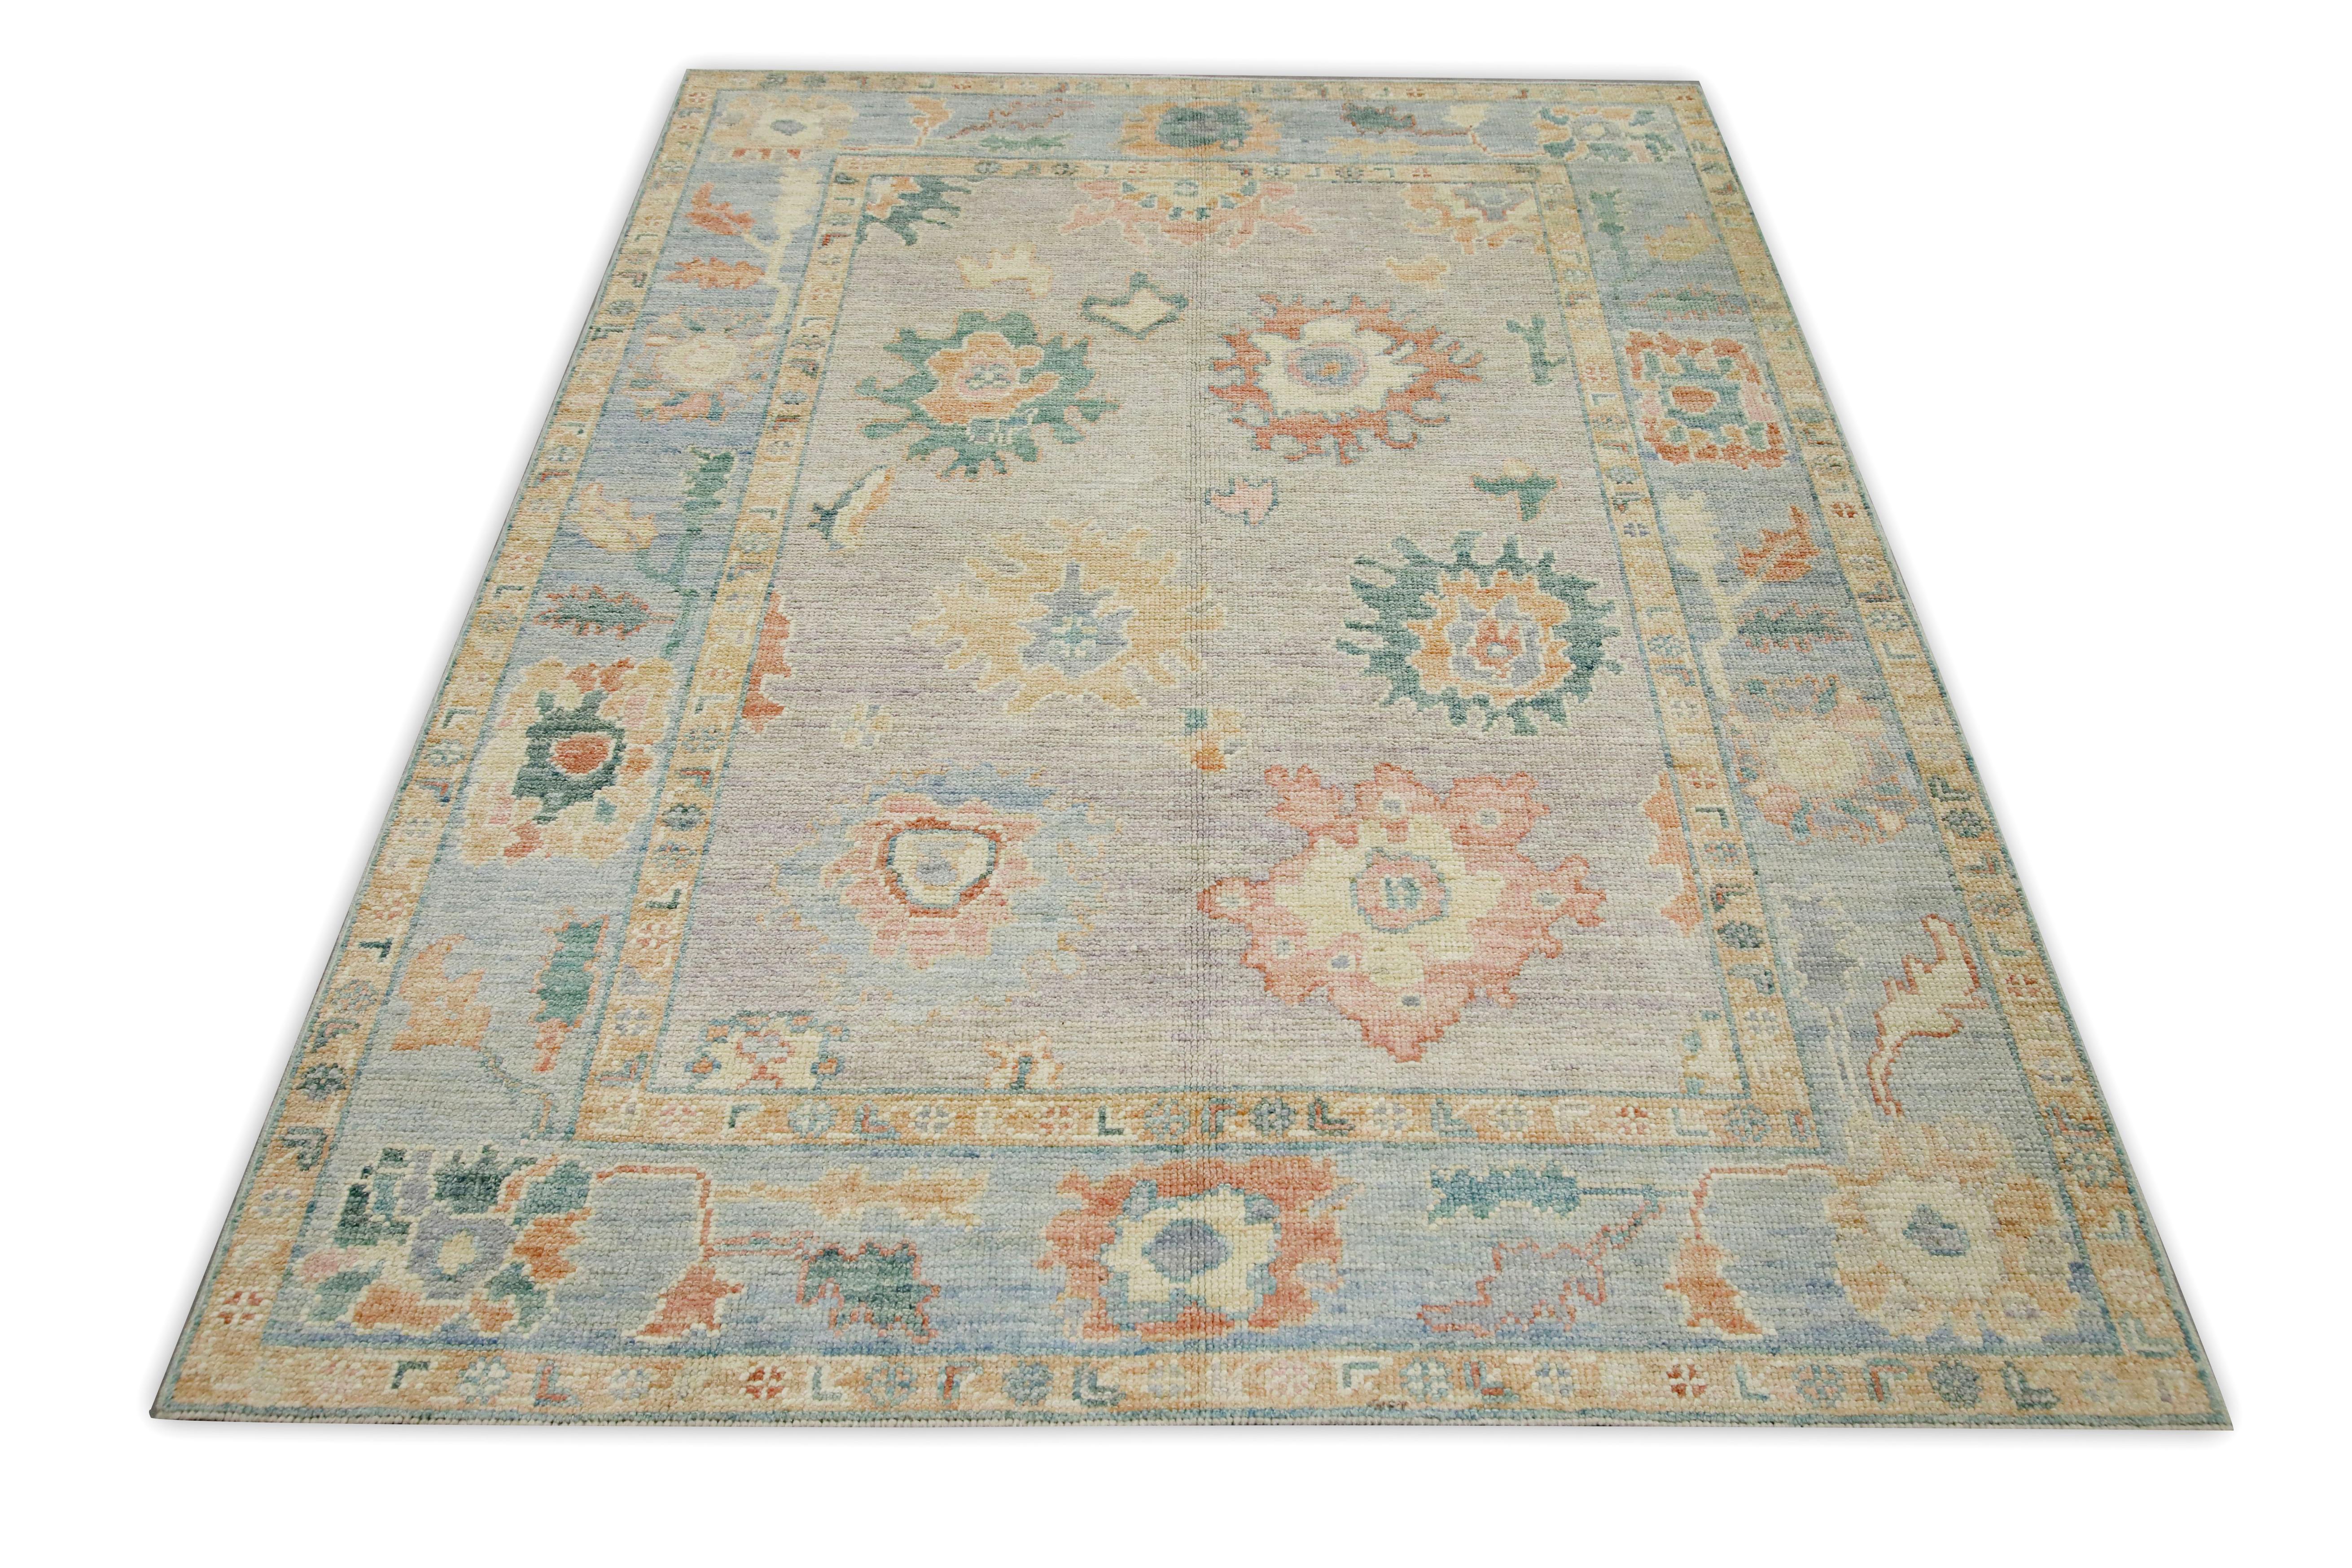 Contemporary Blue Multicolor Floral Design Handwoven Wool Turkish Oushak Rug 4'10